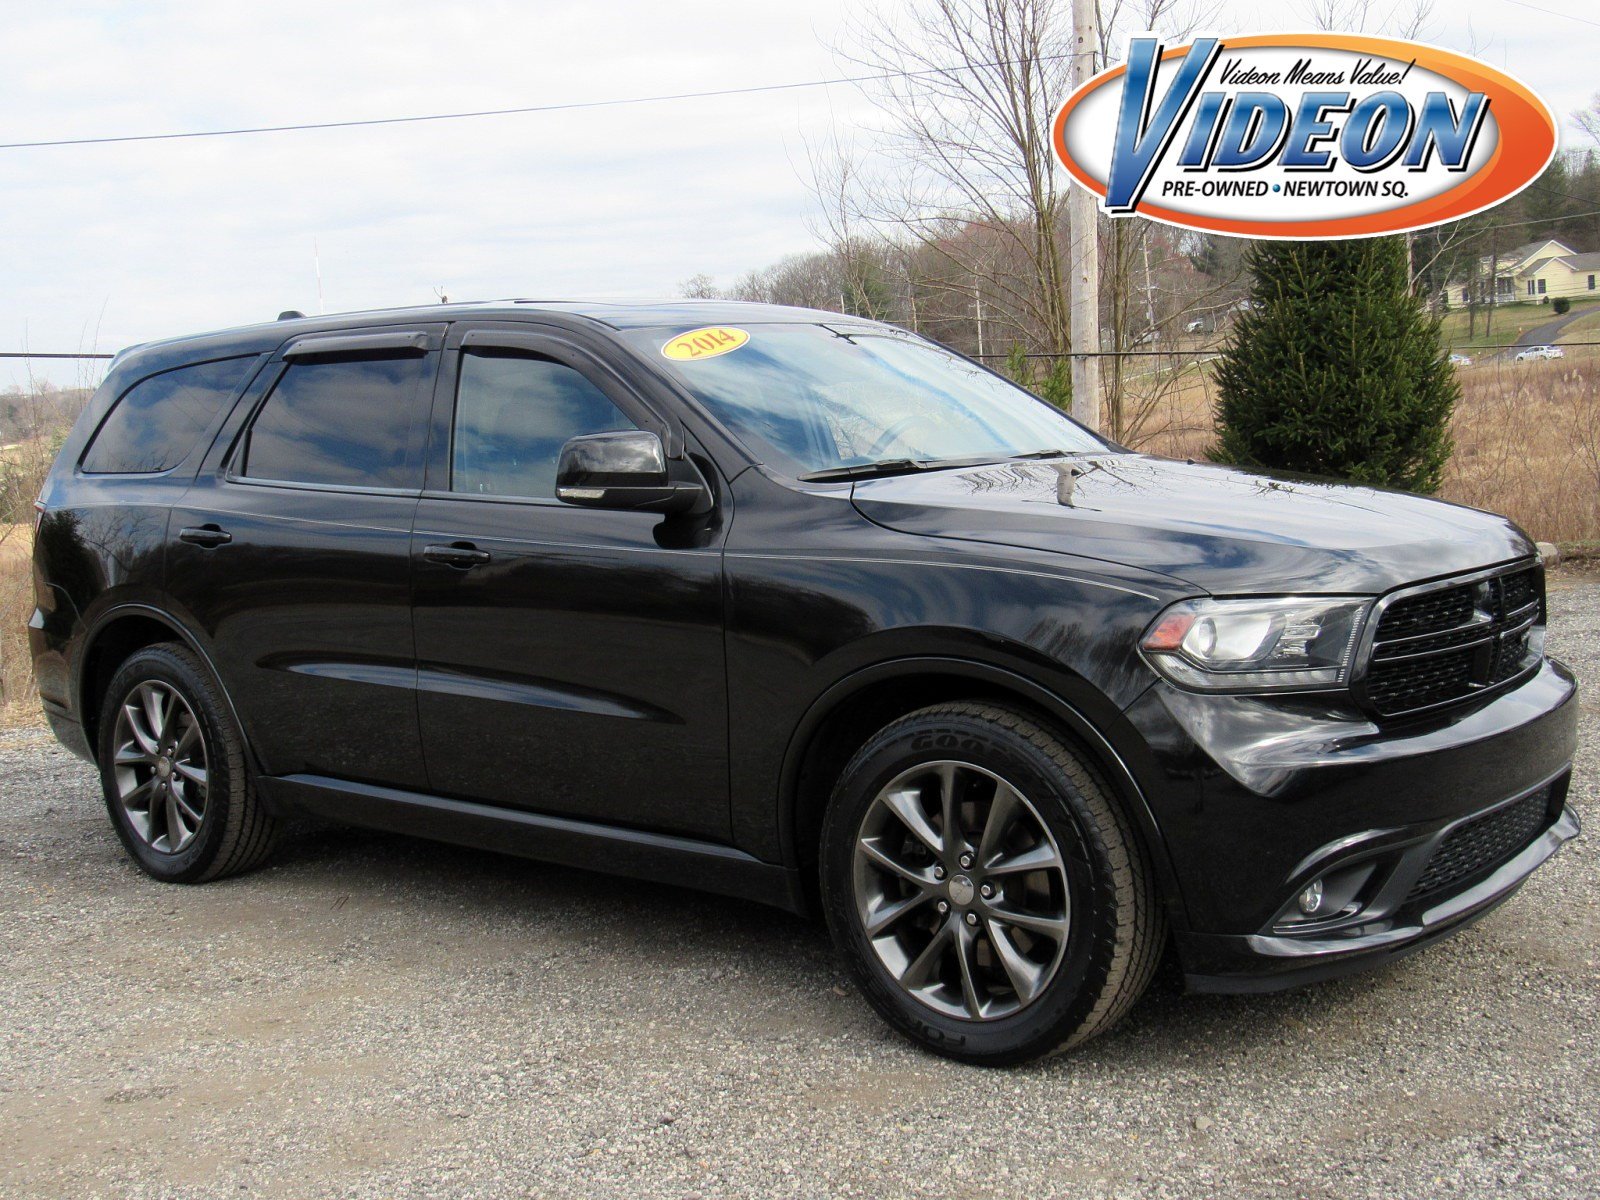 Pre Owned 2014 Dodge Durango R T Sport Utility In Newtown Square